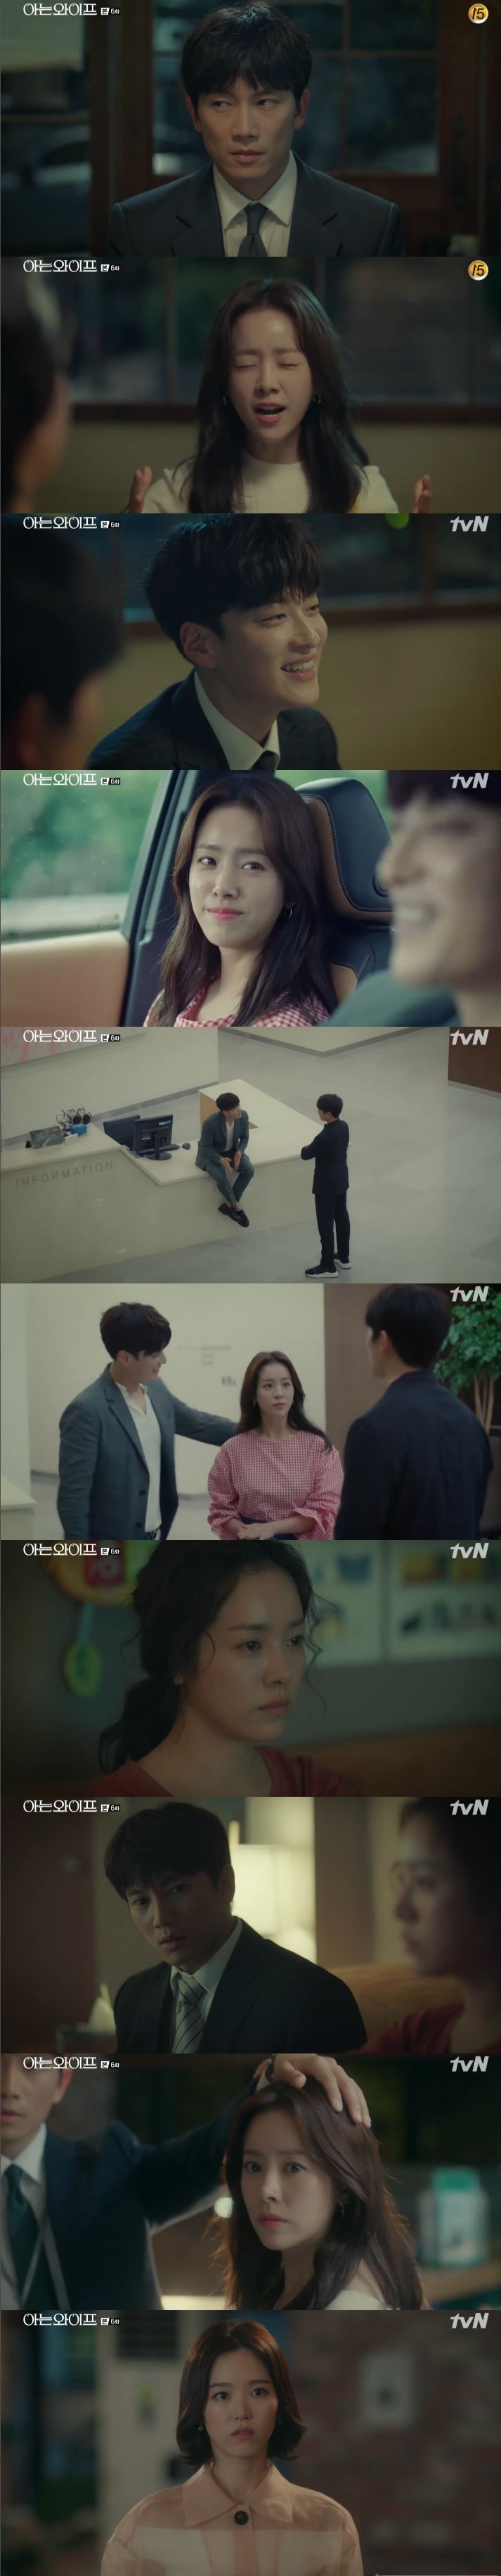 Seoul = = Ji Sung of Knowing Wife felt complicated as he looked at Han Ji-min from a distance.In the 6th episode of the TVN drama Knowing Wife, which was broadcast on the 16th, Seo Woo Jin (Han Ji-min) was shown receiving Confessions from Yoon Jong-hoo (Jang Seung-jo).On this day, Seo Woo Jin laughed at Yoon Jong-hoo, who is doing Confessions to him, saying, I am in a hurry. He looked at Yoon Jong-hoo and said, What should I answer now?I do not know yet, Yoon Dae-ri, I do not know. It may be a serial killer. Cha Ju-hyuk (Ji Sung) was watching this outside the door.Cha Ju-hyuk eventually drank together to turn Yun Jong-hus mind toward Seo Woo Jin and said, Did you not see blood while in-house dating? What are you trying to do?Meet another woman. There are many beautiful women in the world. Ill tell my wife. Ill recognize her as a younger person.However, Yoon Jong-hoo approached Seo Woo Jin with his unique sense and affinity, and he grew more and more favorable to his hairy and human aspect.Yoon Jong-hoo rode a bicycle along Seo Woo Jin and accidentally ran into his friend Oh Sang-shik (Oh Ui-sik) on the street.Oh Sang-shik recognized Seo Woo Jin with Yoon Jong-hoo at once and said, Oh, this is the only one Mr. Woojin. Oh Sang-shik invited Seo Woo Jin and Yun Jong-hoo to his store.Cha Ju-eun (Park Hee-bon), who saw Seo Woo Jin who came into the store, showed a surprise response, and Cha Ju-hyuk was also located in his sisters store, so everyone met.While Seo Woo Jin was away for a while, Yoon Jong-hoo was excited about the one-night two-day trip with Seo Woo Jin.In particular, he was worried when Yoon Jong-hoo, who asked me to borrow a car, said, I will take a little progress in this place. The next day, my wife played golf with adults, but my thoughts continued to Woojin and the end.In the end, Joo Hyuk went to meet two people who went to Yang Yang, and Yun Jong-hoo, who saw Cha Ju-hyuk in Yang Yang, was freaked out.On the other hand, at the end of the broadcast, Seo Woo Jin said that there is something to check, and brought Cha Ju-hyuks hand to his head, and Lee Hye-won (Ganghanna), who came to visit her husband who worked overtime, witnessed this appearance.